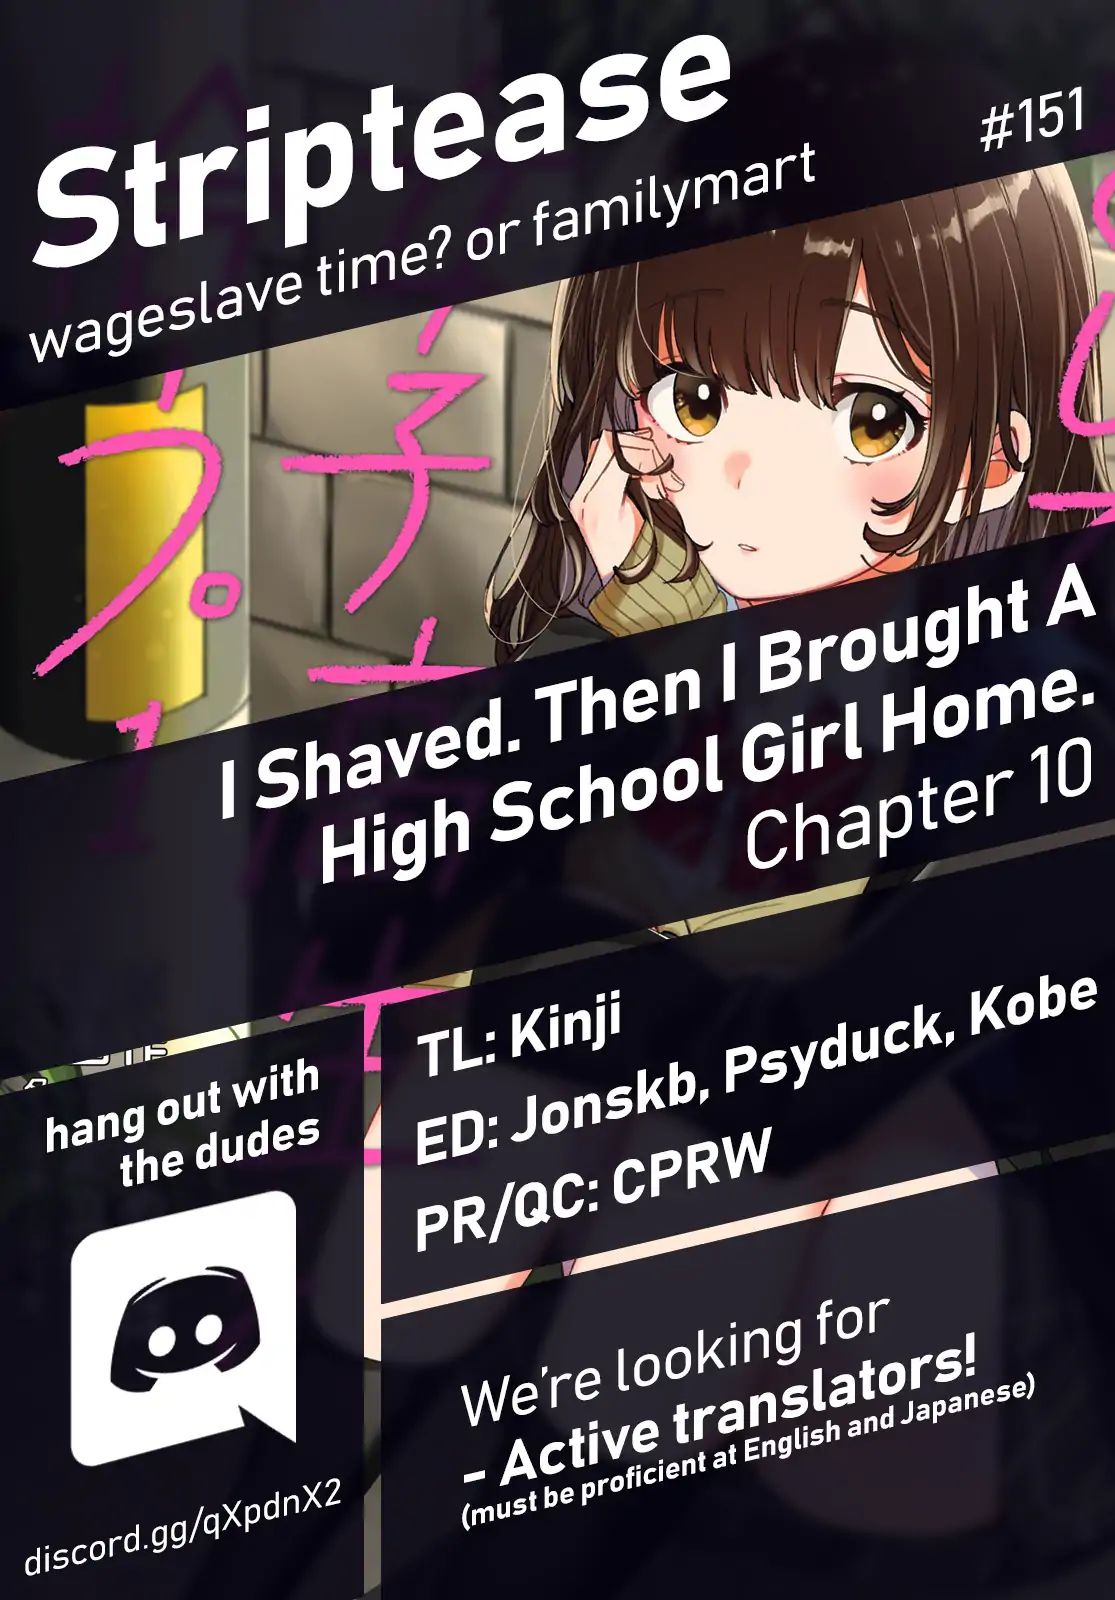 I Shaved. Then I Brought a High School Girl Home. - chapter 10 - #1